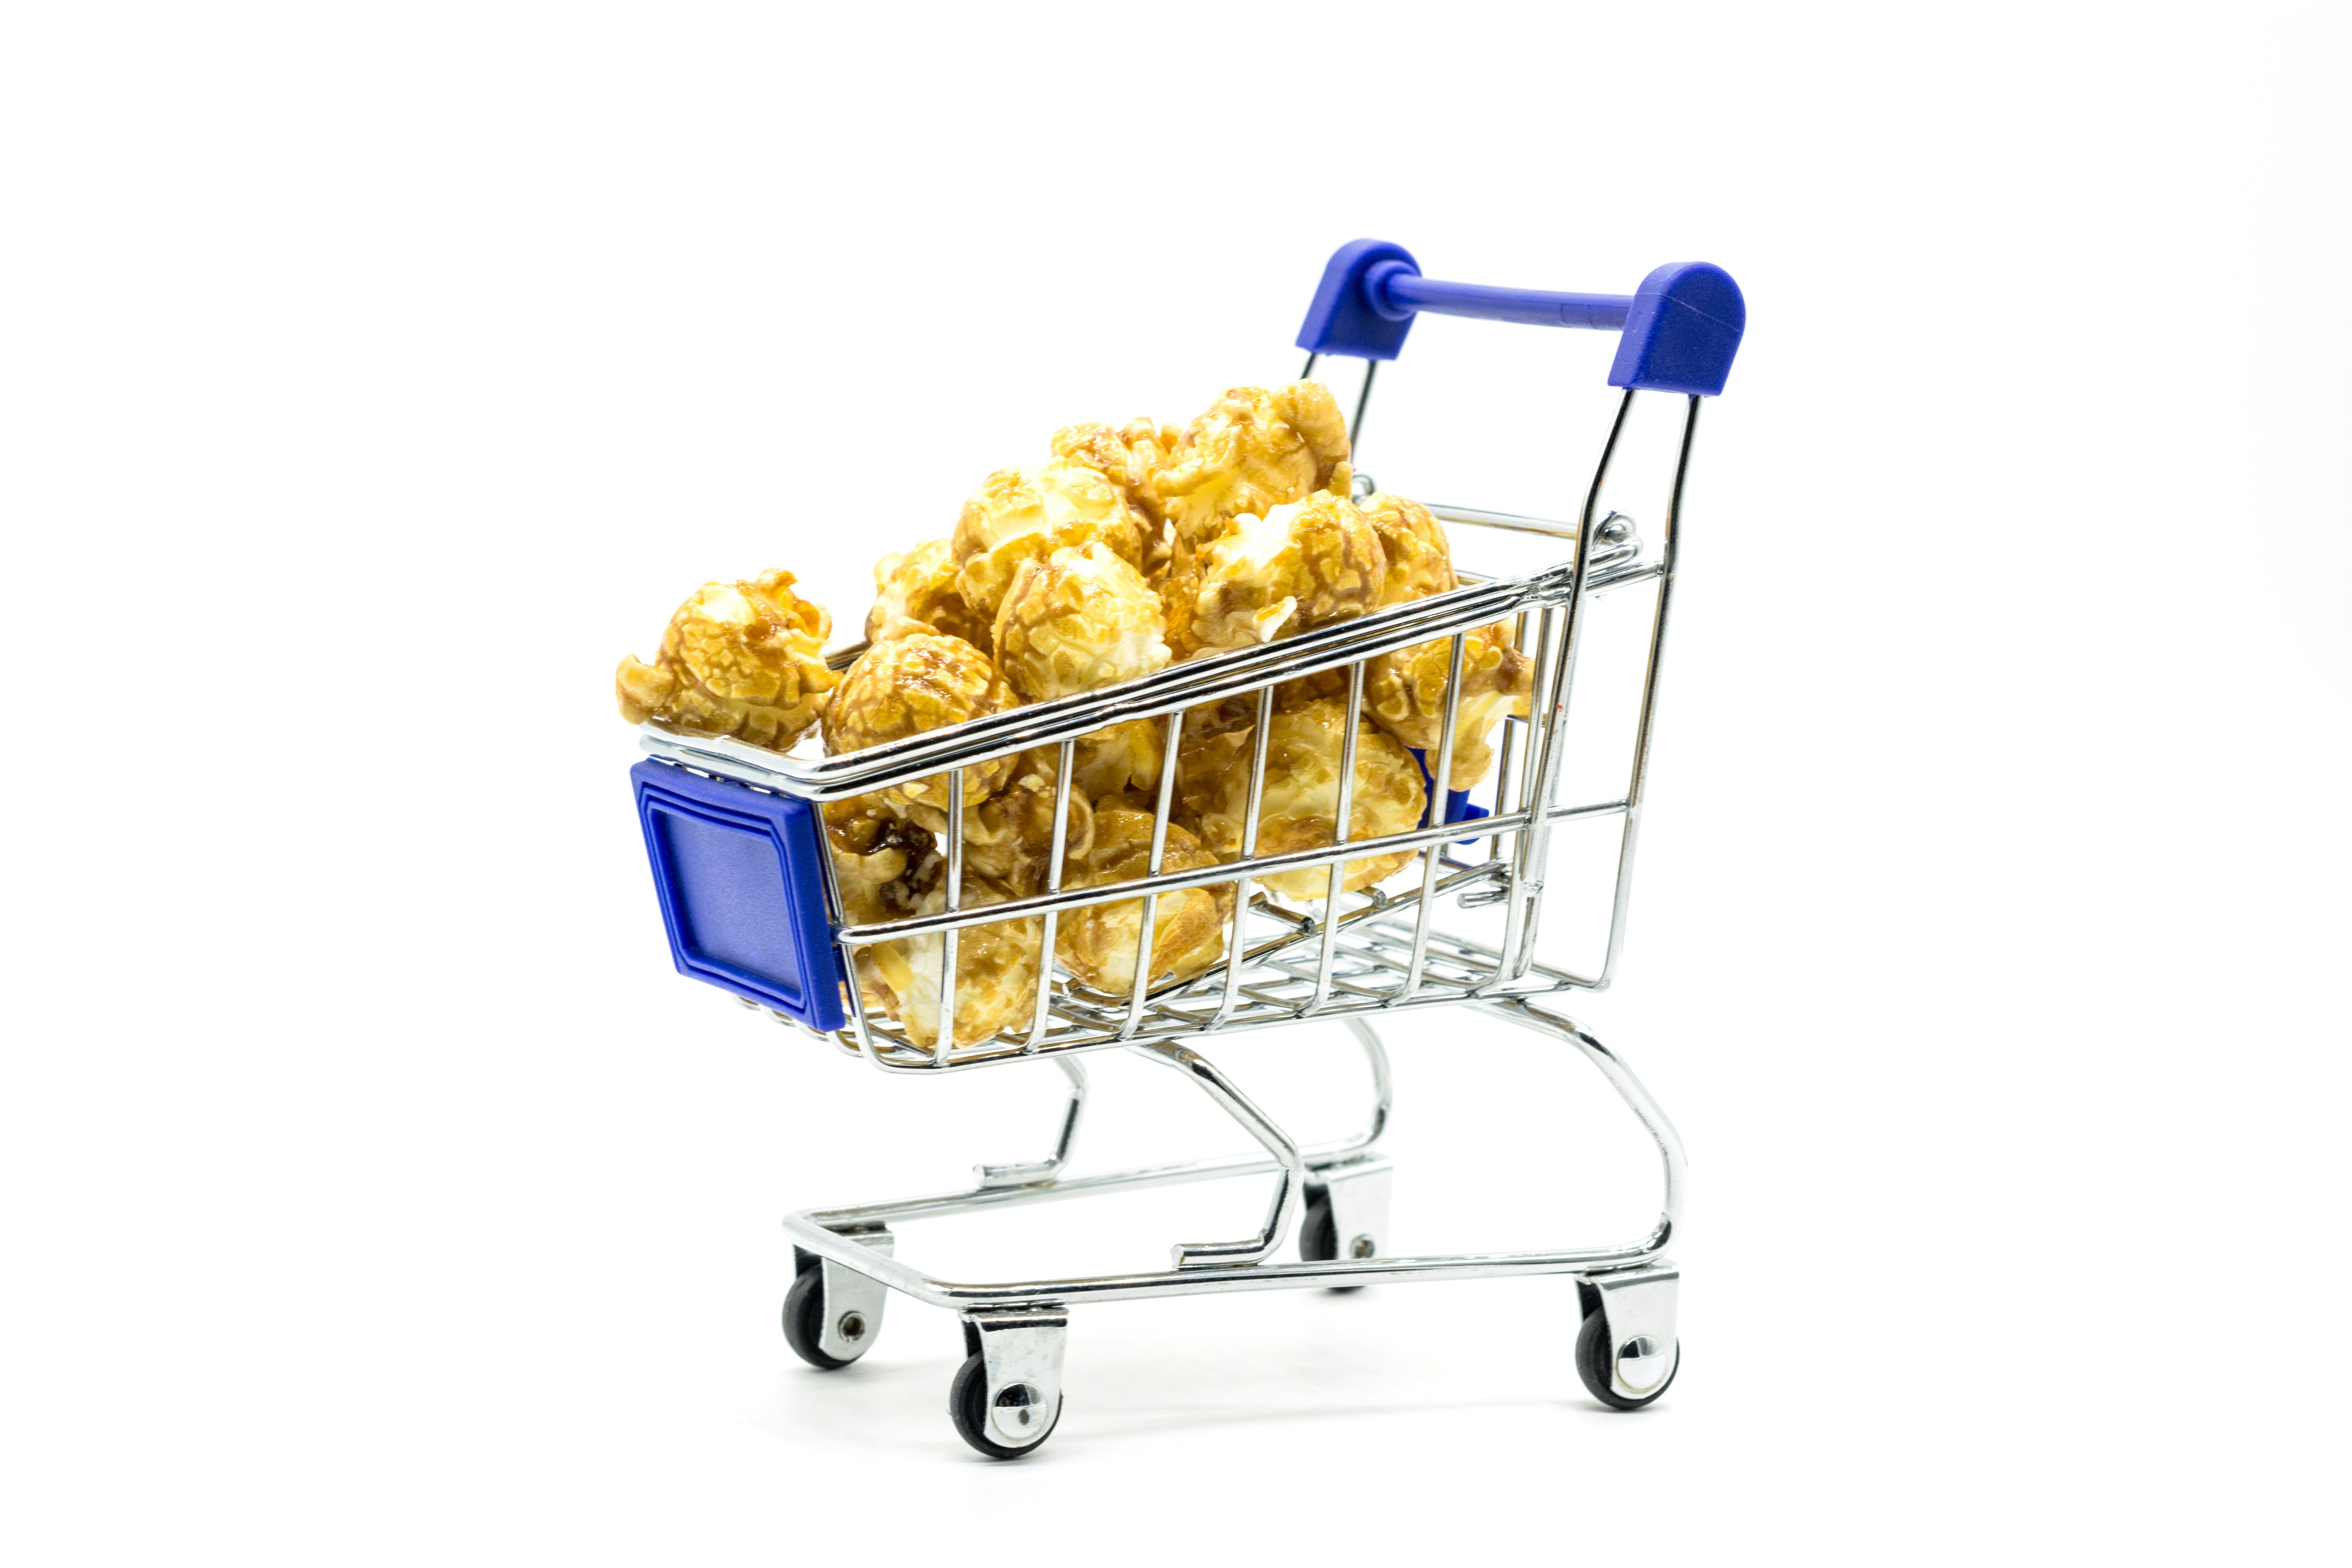 Shopping trolley toy full of popcorn on white background minimal concept. Instagram - @bermixstudio | Donation https://paypal.me/bermixclub Goal: $0 of $100 - any amount appreciated 🤘